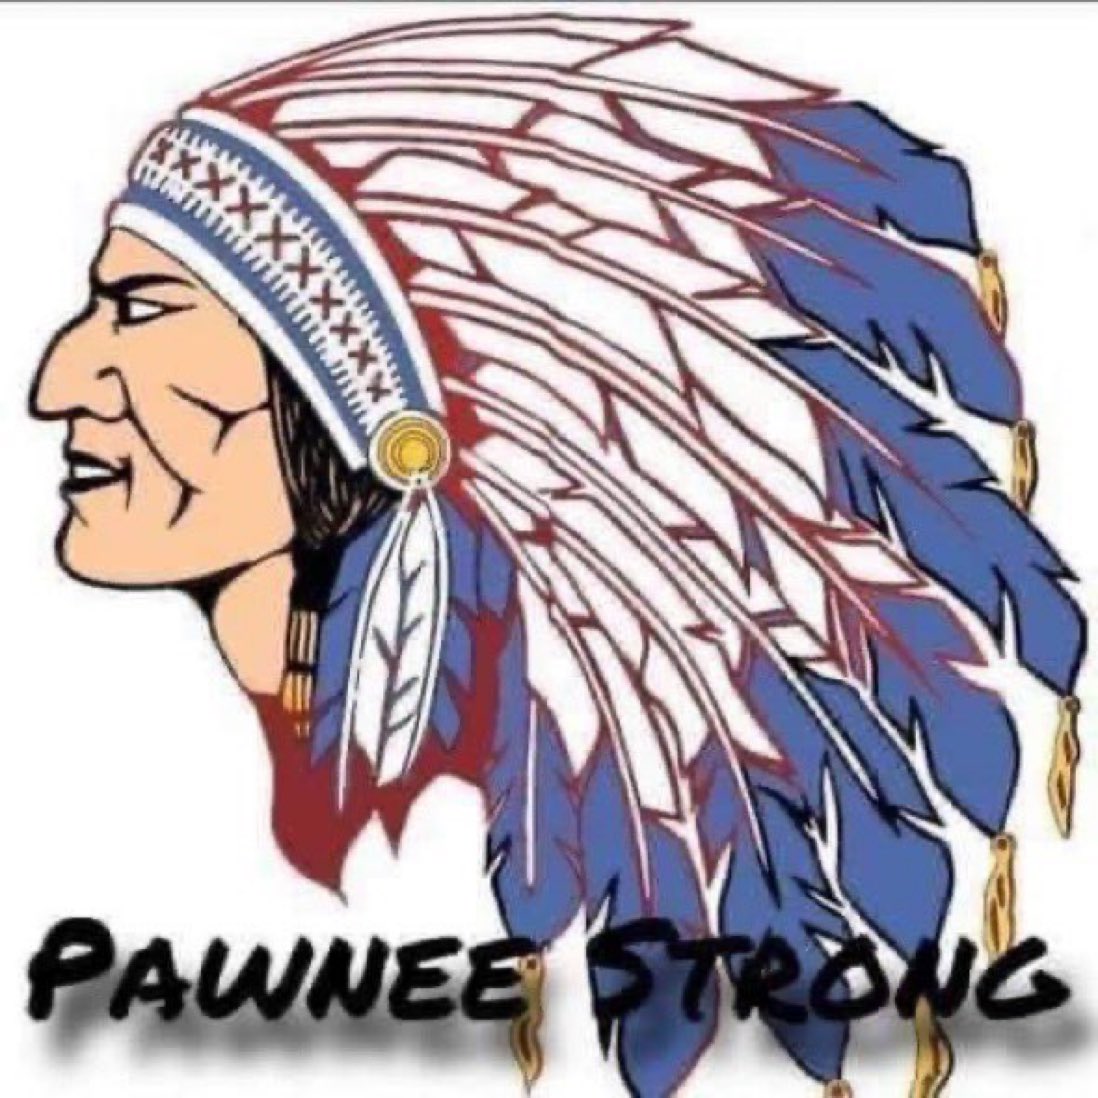 The EPG community stands with Pawnee Schools and community as they mourn the sudden passing of their coach, principal, Superintendent and friend, Tim Kratochvil. Our thoughts and prayers are with you.